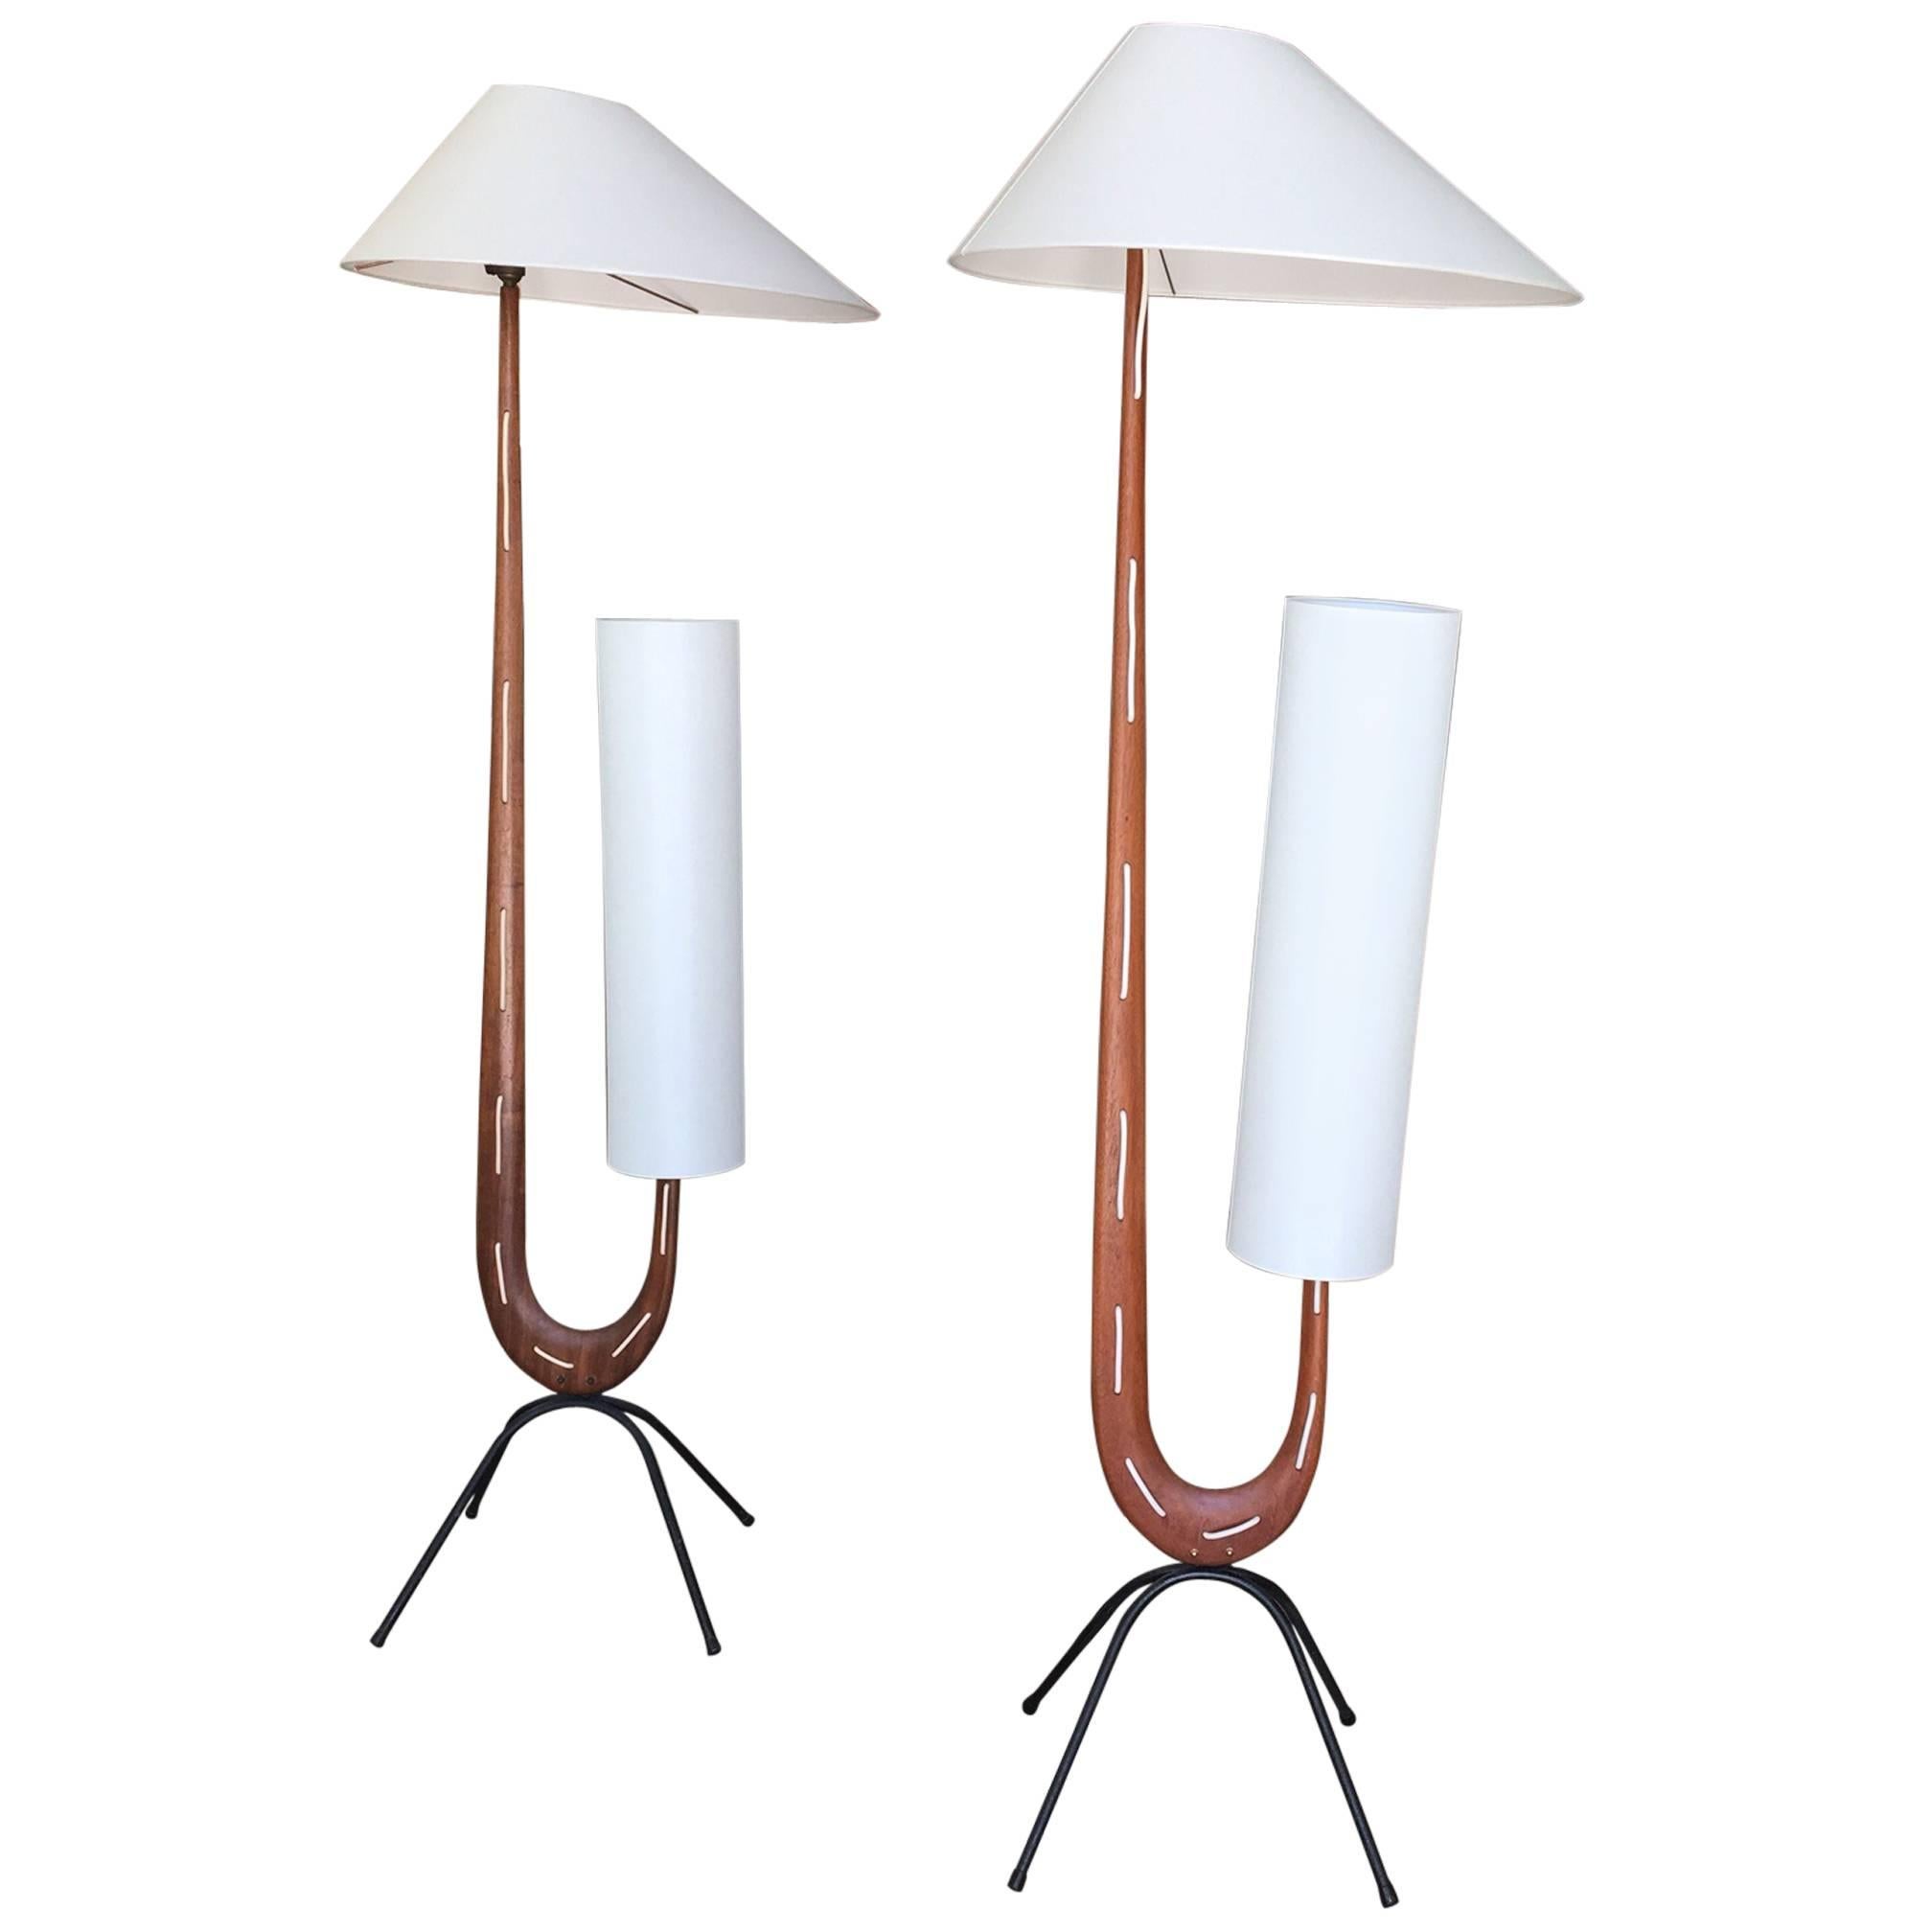 Elegant Pair of Rispal Co. 'Paris' French Sculptural Floor Lamps from the 1950s